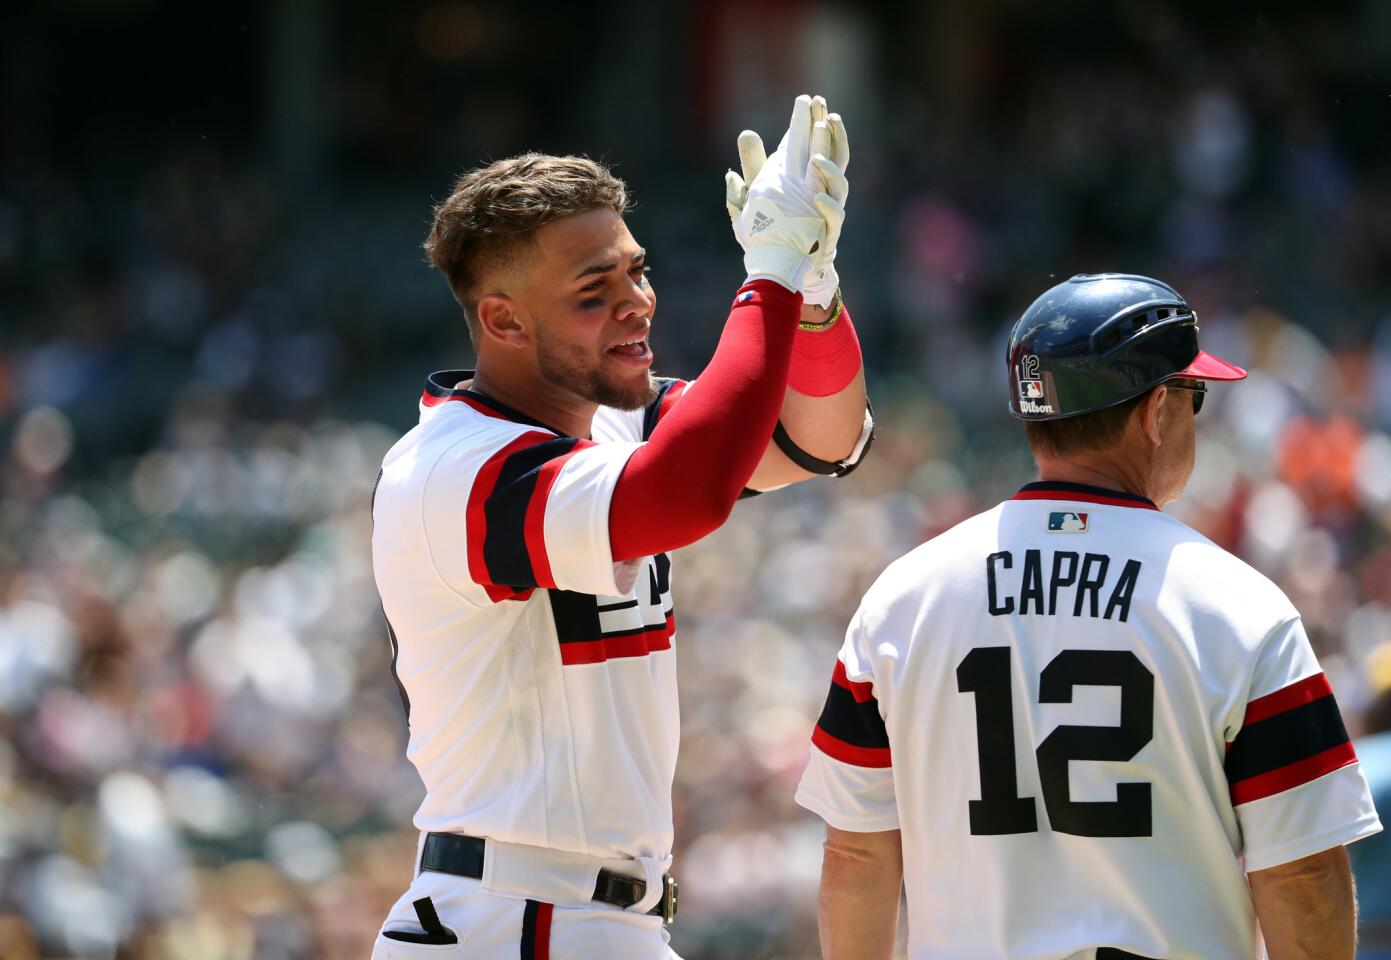 White Sox second baseman Yoan Moncada celebrates his triple against the Brewers in the second inning Sunday, June 3, 2018, at Guaranteed Rate Field.